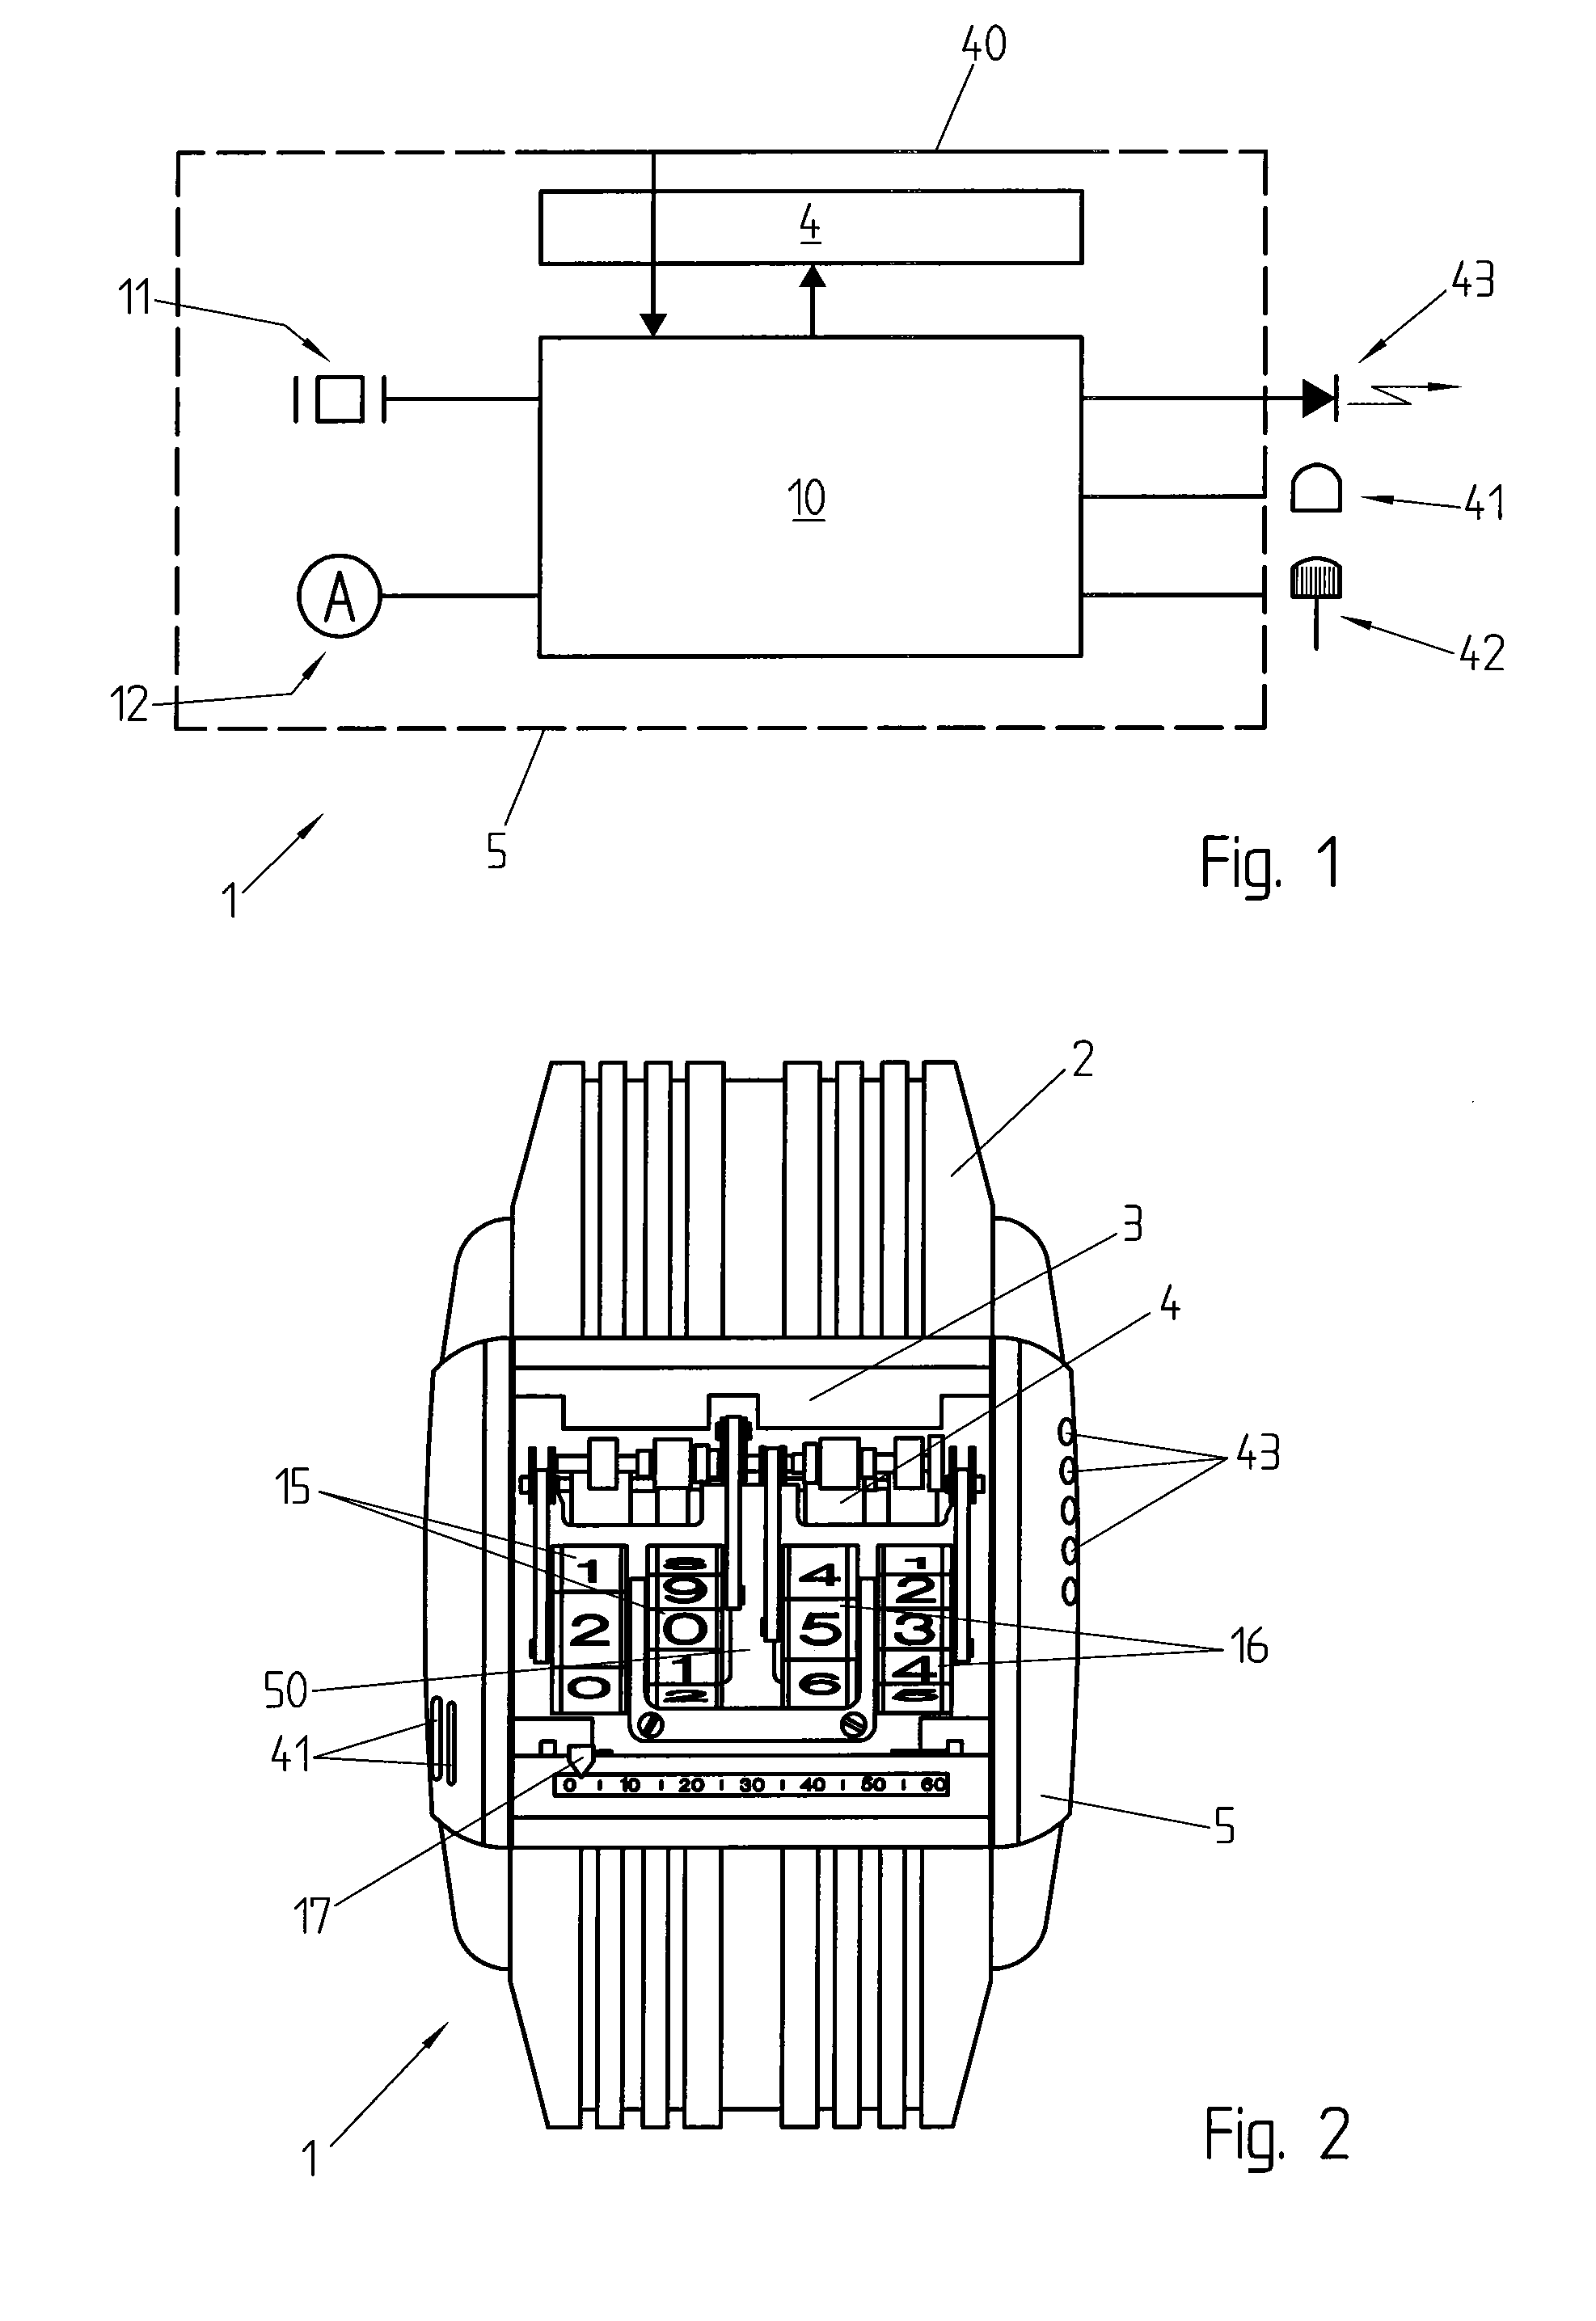 Wristwatch with electronic display